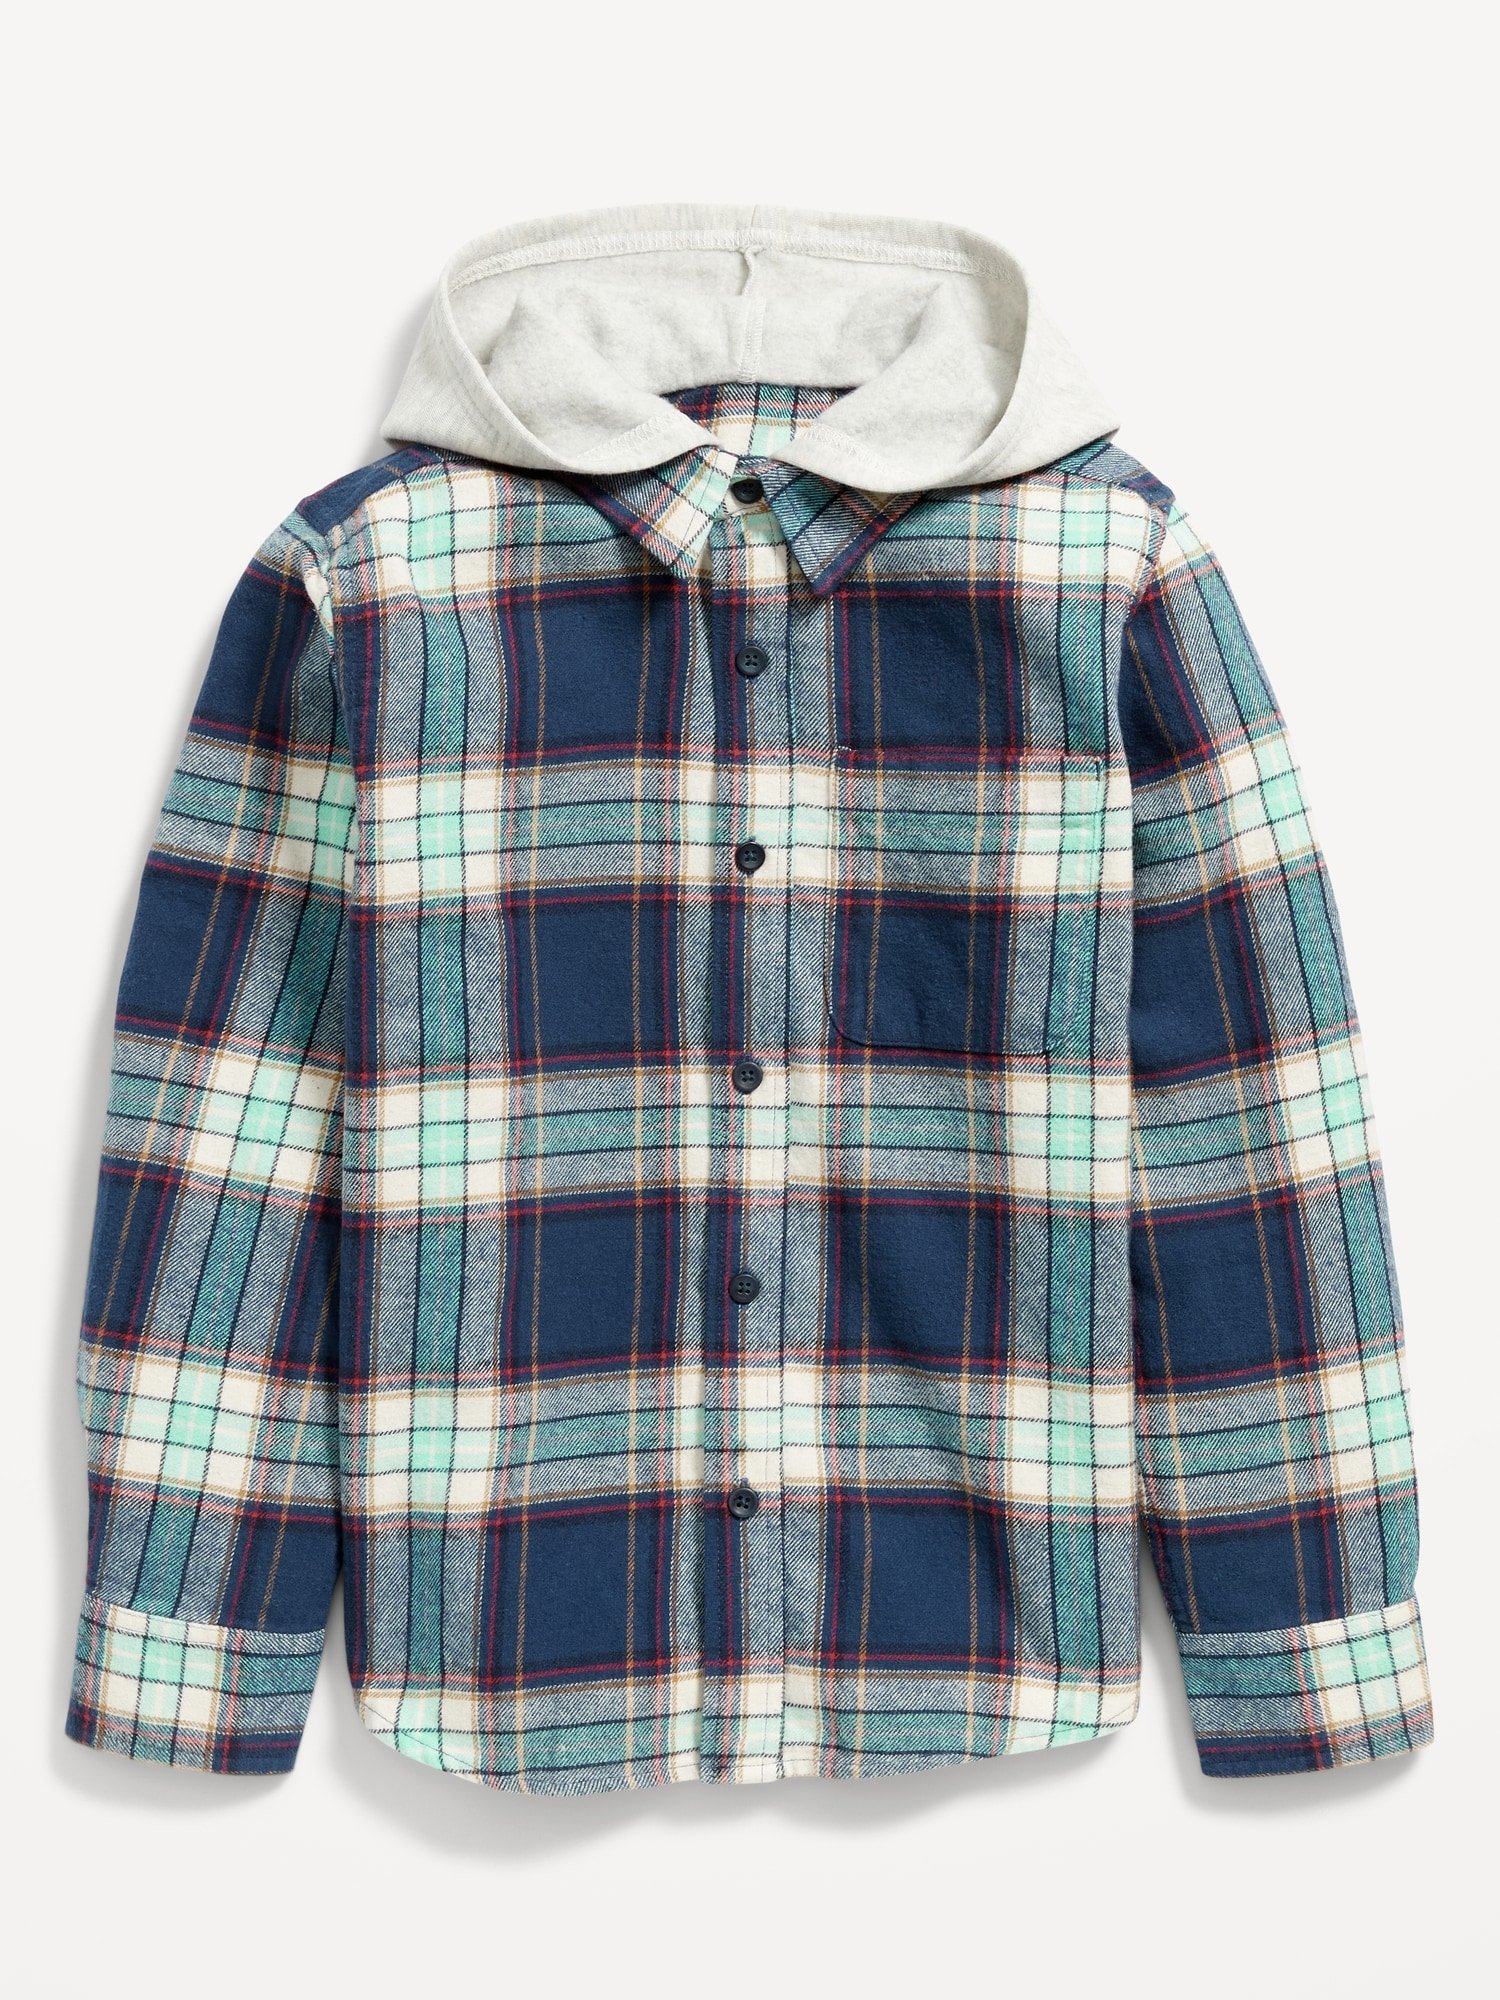 ONLINE EXCLUSIVE_2-in-1 Hooded Flannel Shacket for Boys_BlueMultiPlaid_1850.jpeg